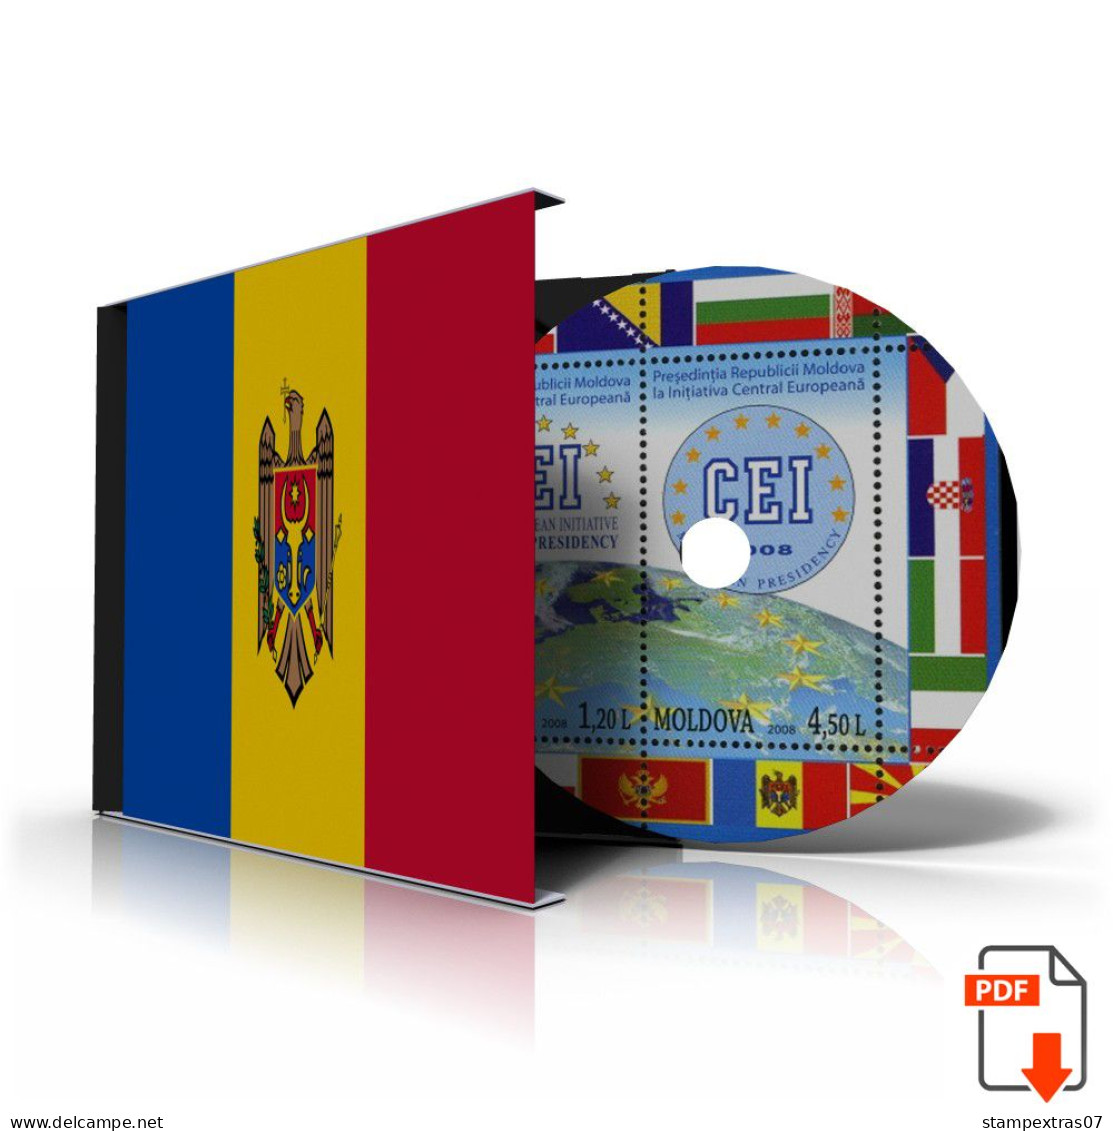 MOLDOVA STAMP ALBUM PAGES 1991-2011 (100 Color Illustrated Pages) - Inglés